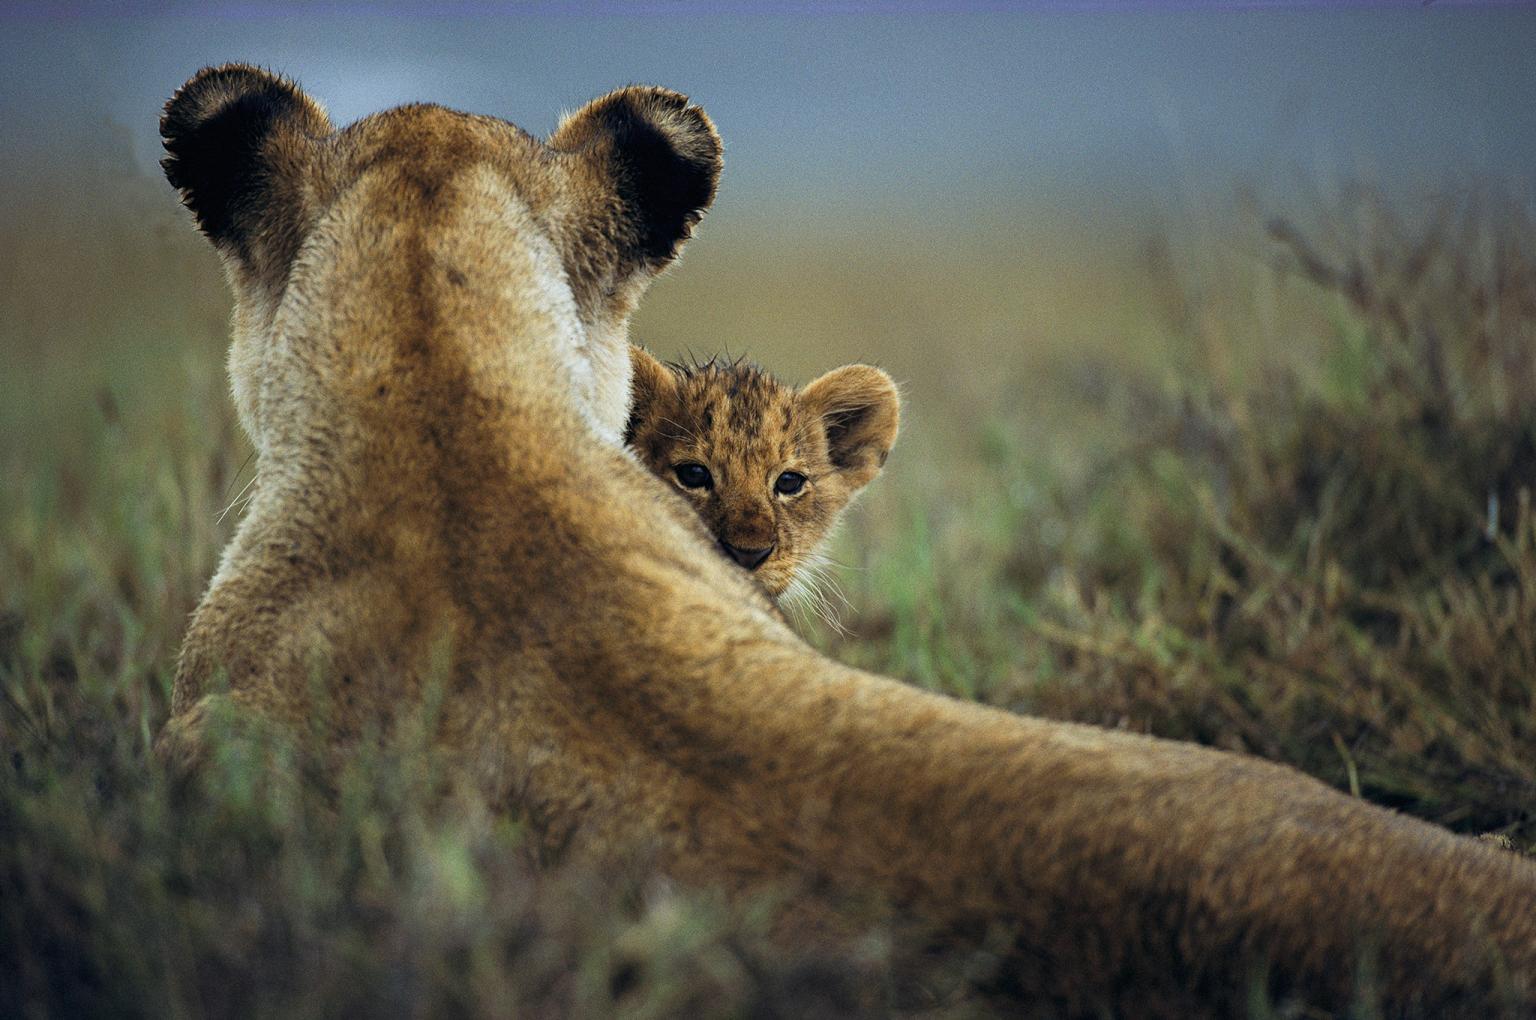 A lioness sits with her cub in Tanzania’s Ngorongoro Conservation Area.